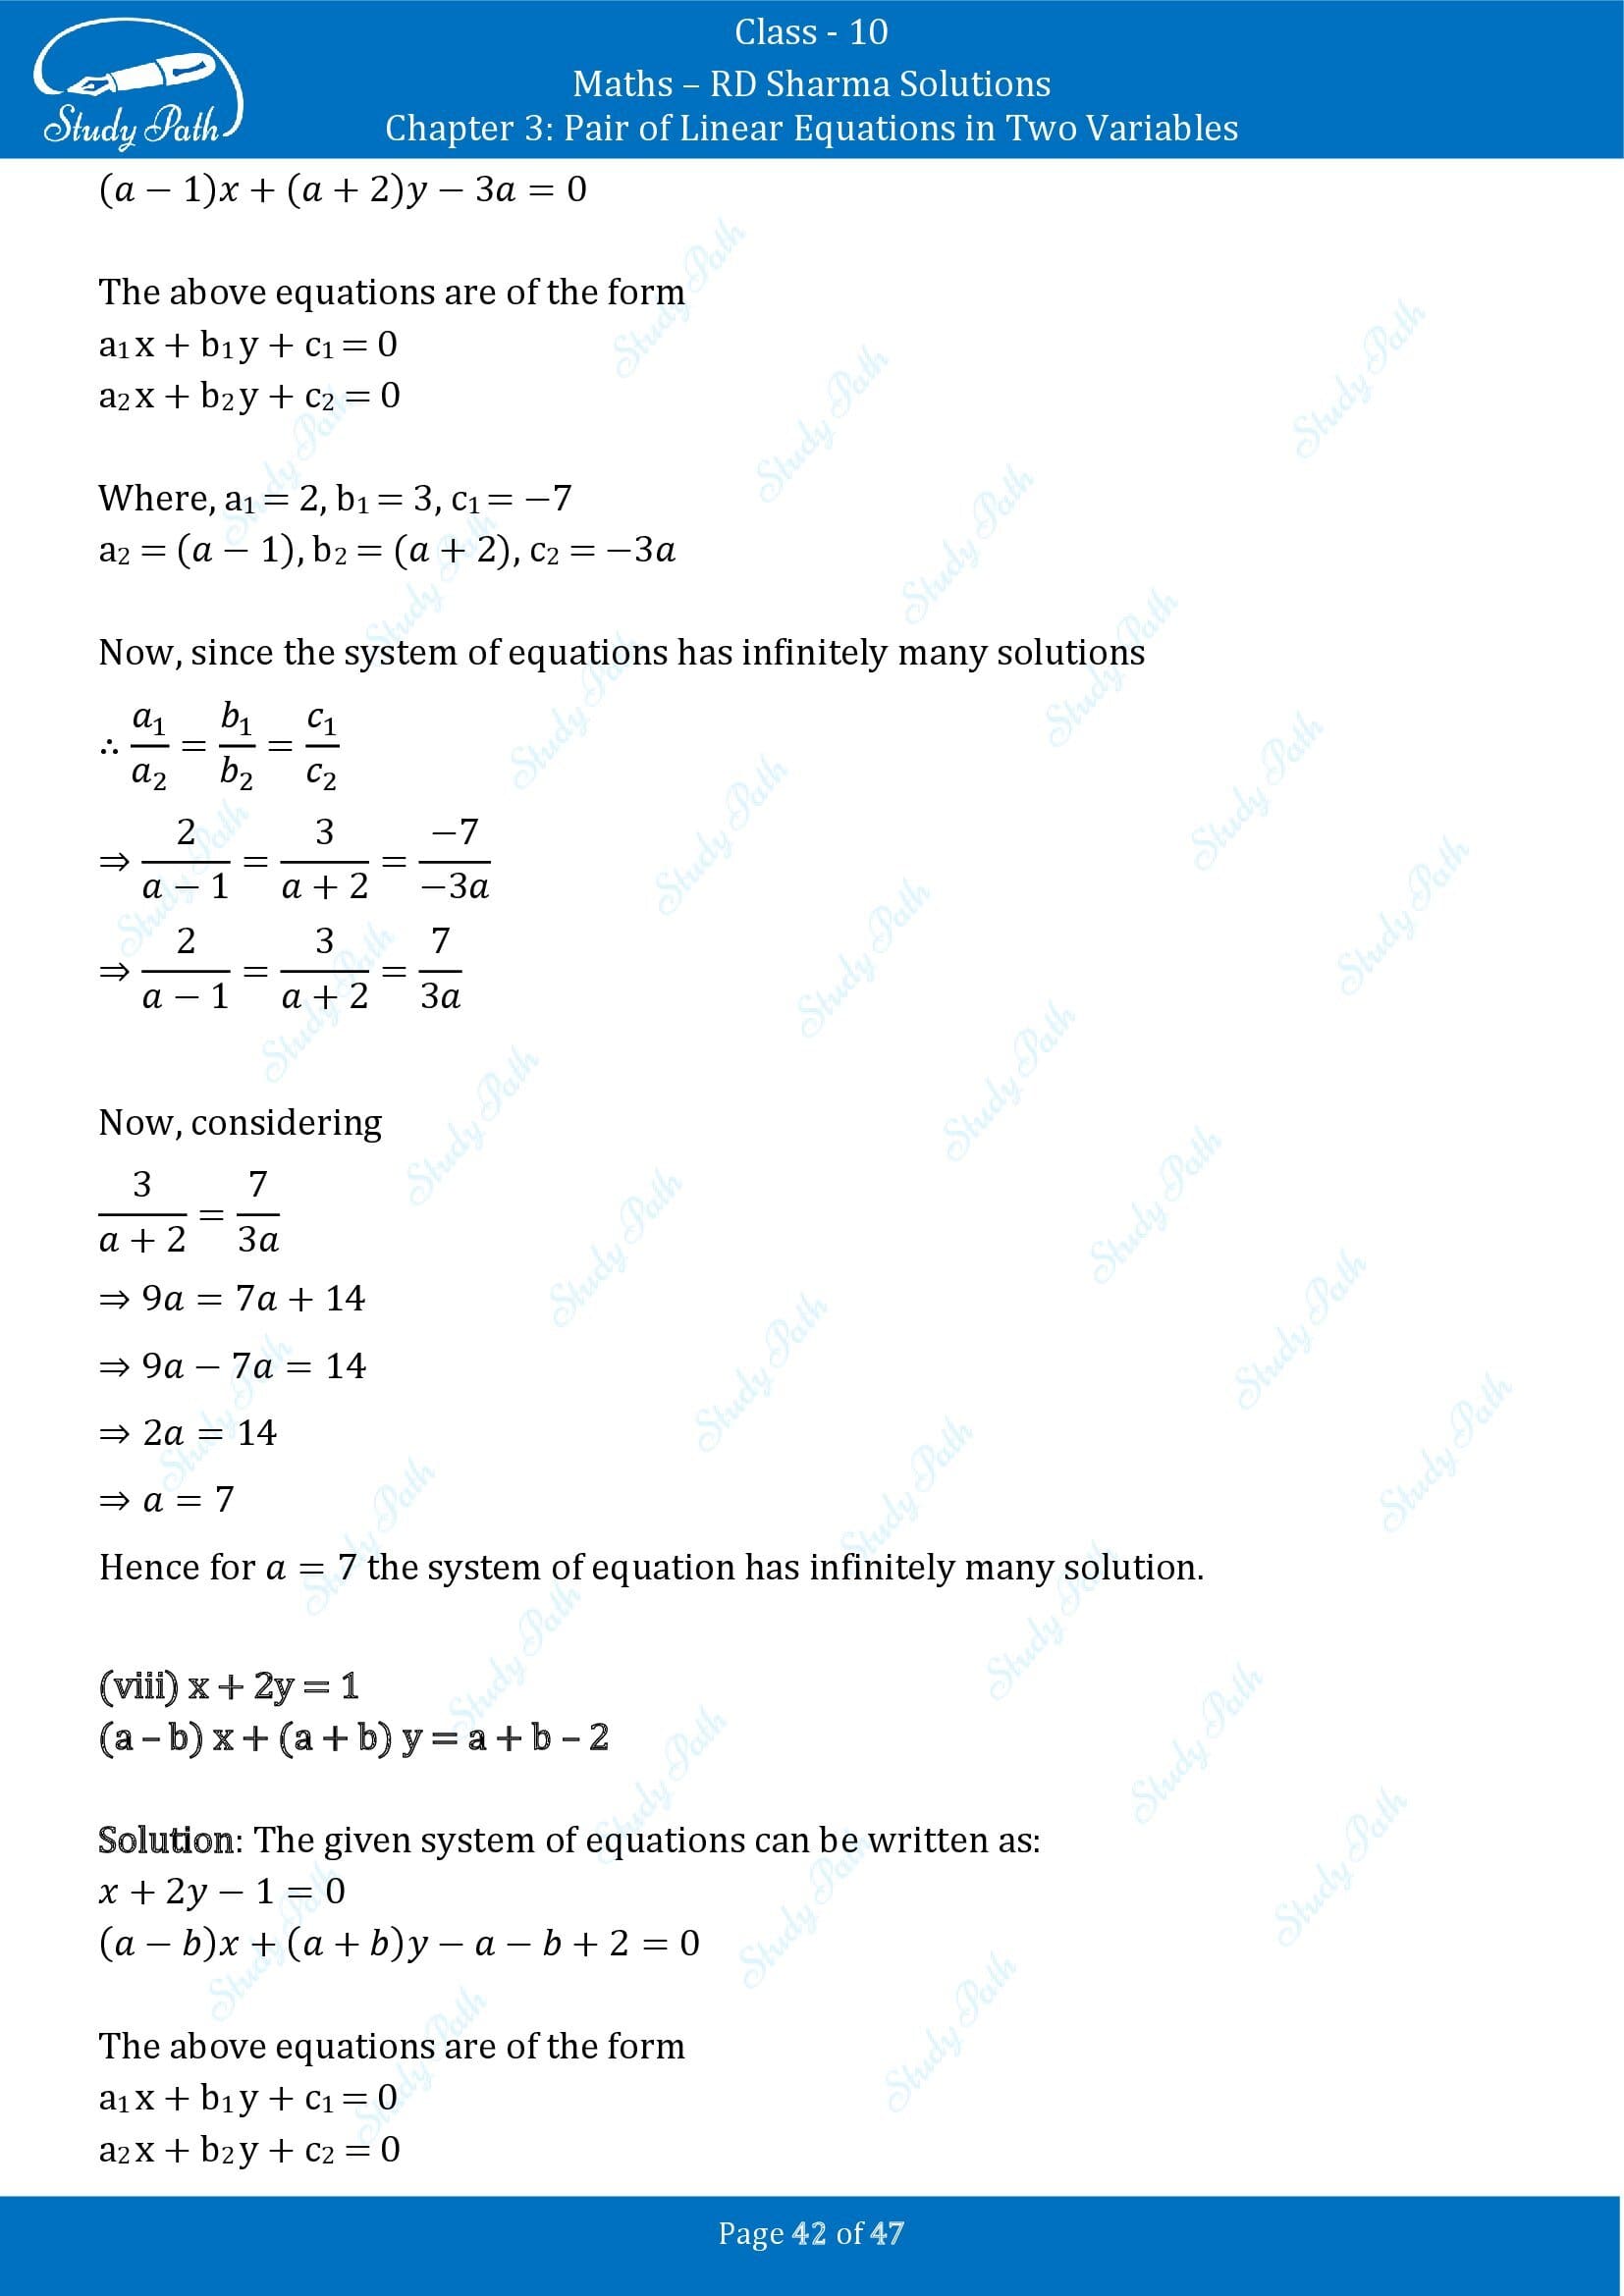 RD Sharma Solutions Class 10 Chapter 3 Pair of Linear Equations in Two Variables Exercise 3.5 00042